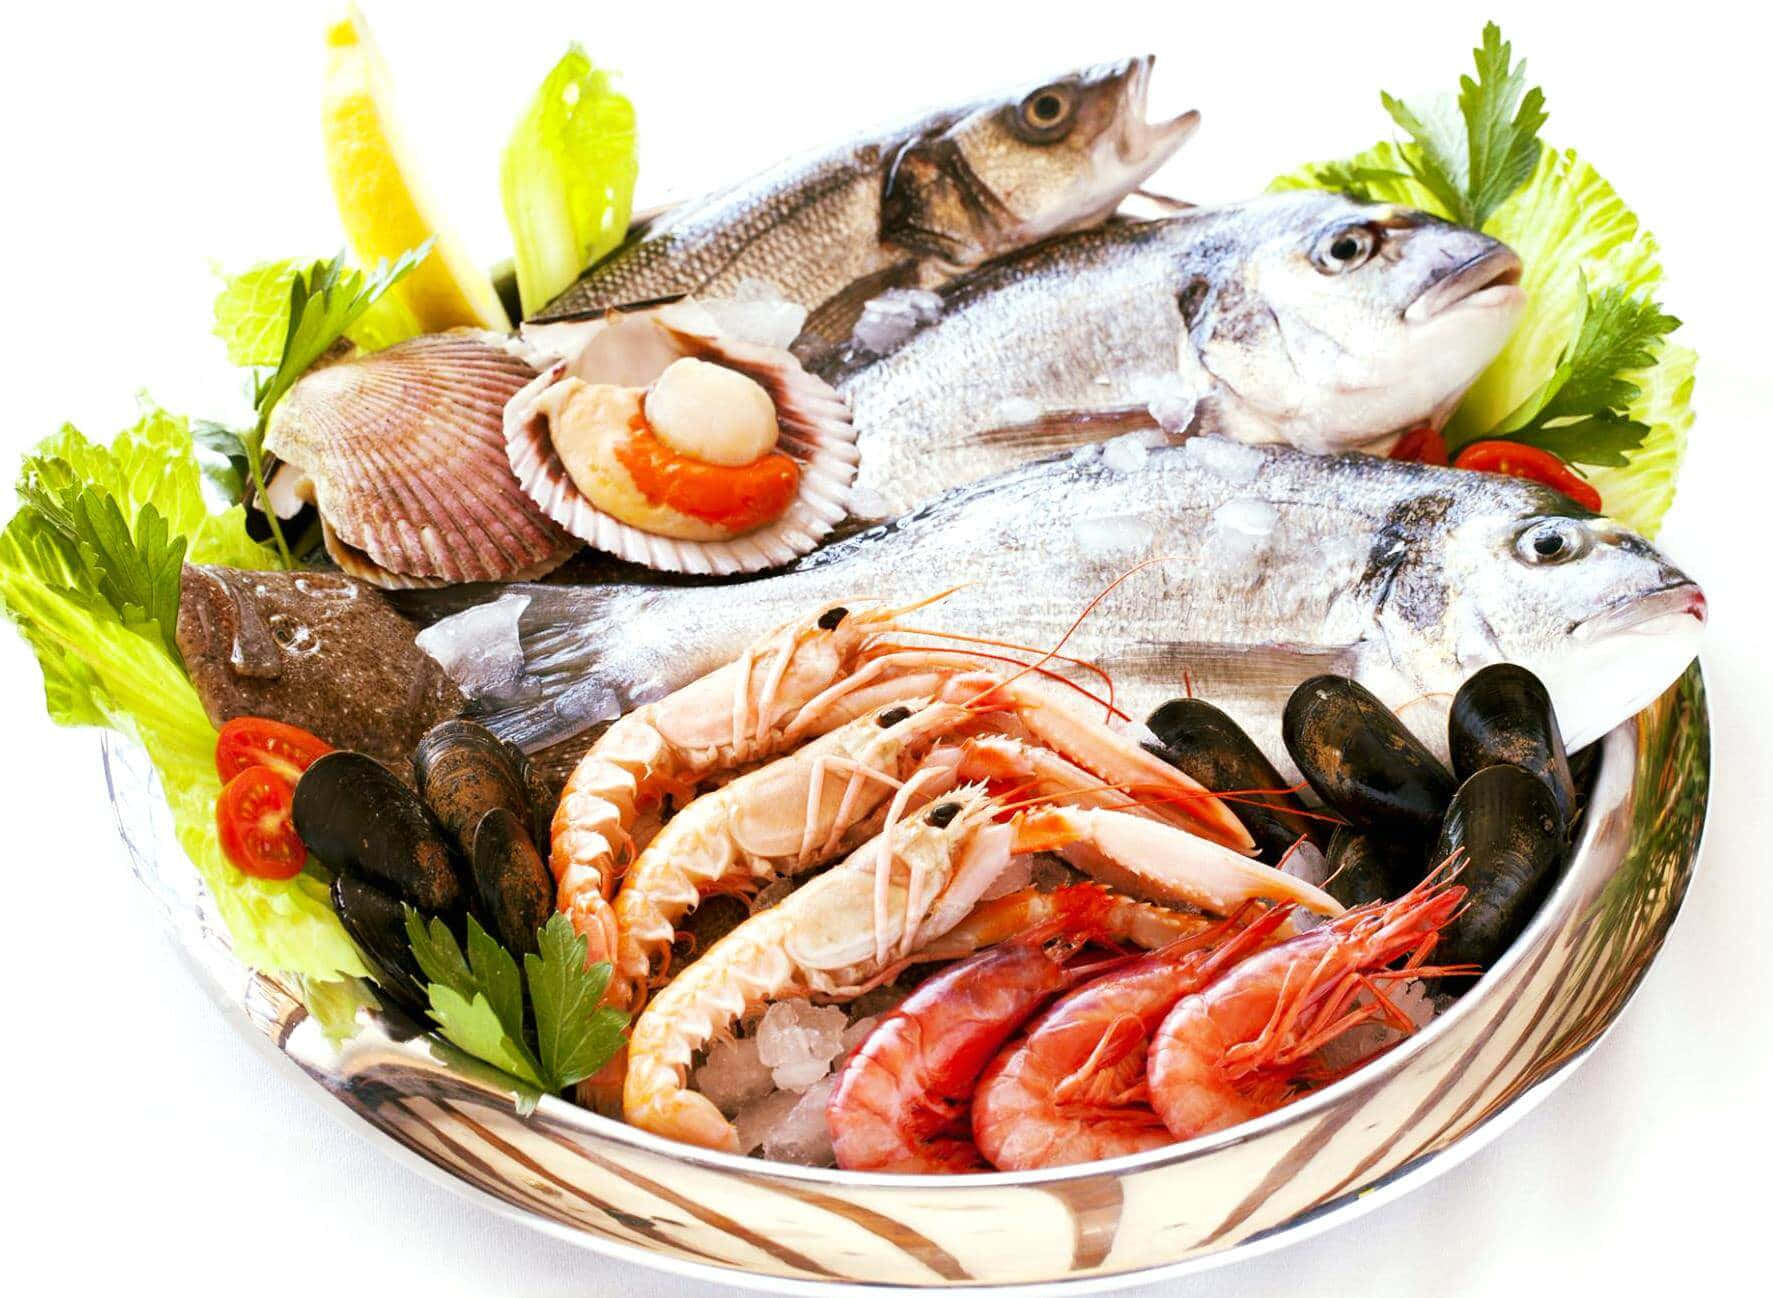 See the freshness of seafood